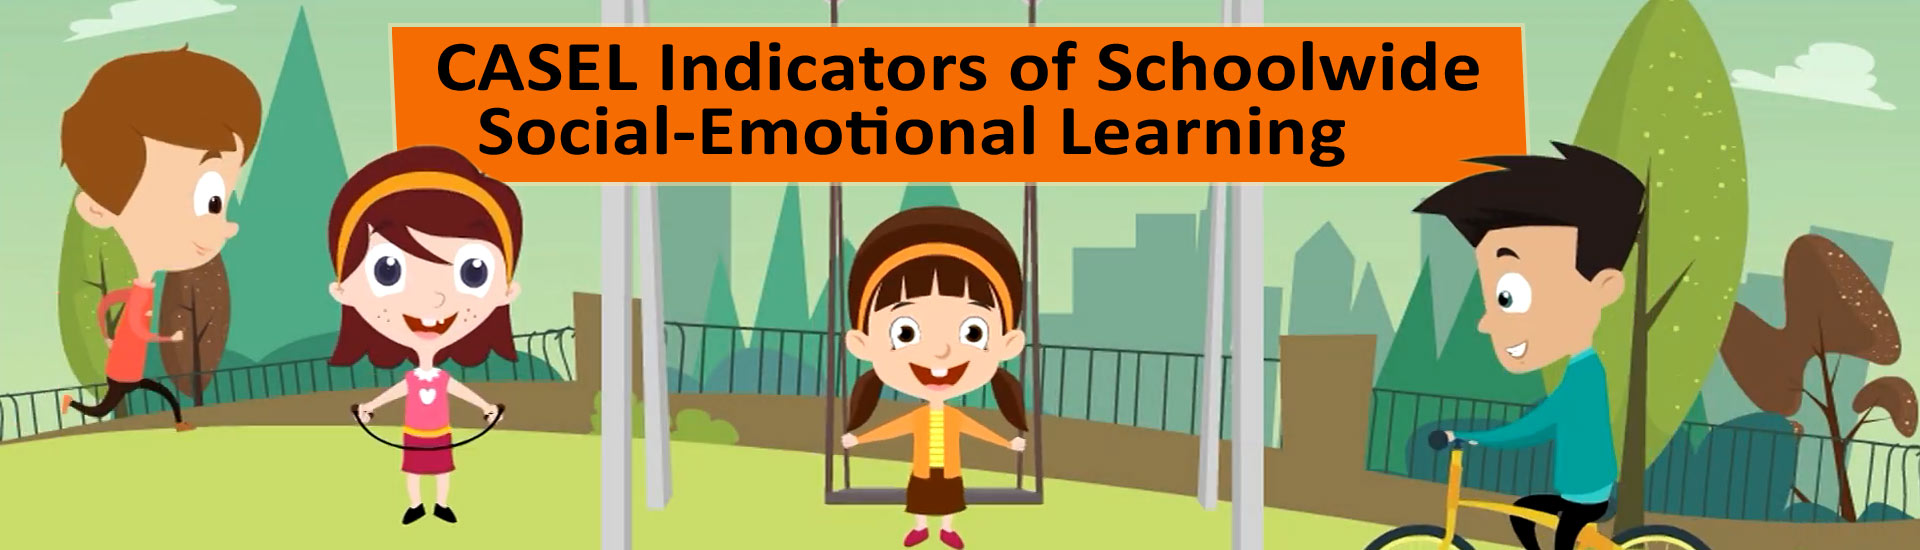 CASEL Indicators of Schoolwide Social-Emotional Learning